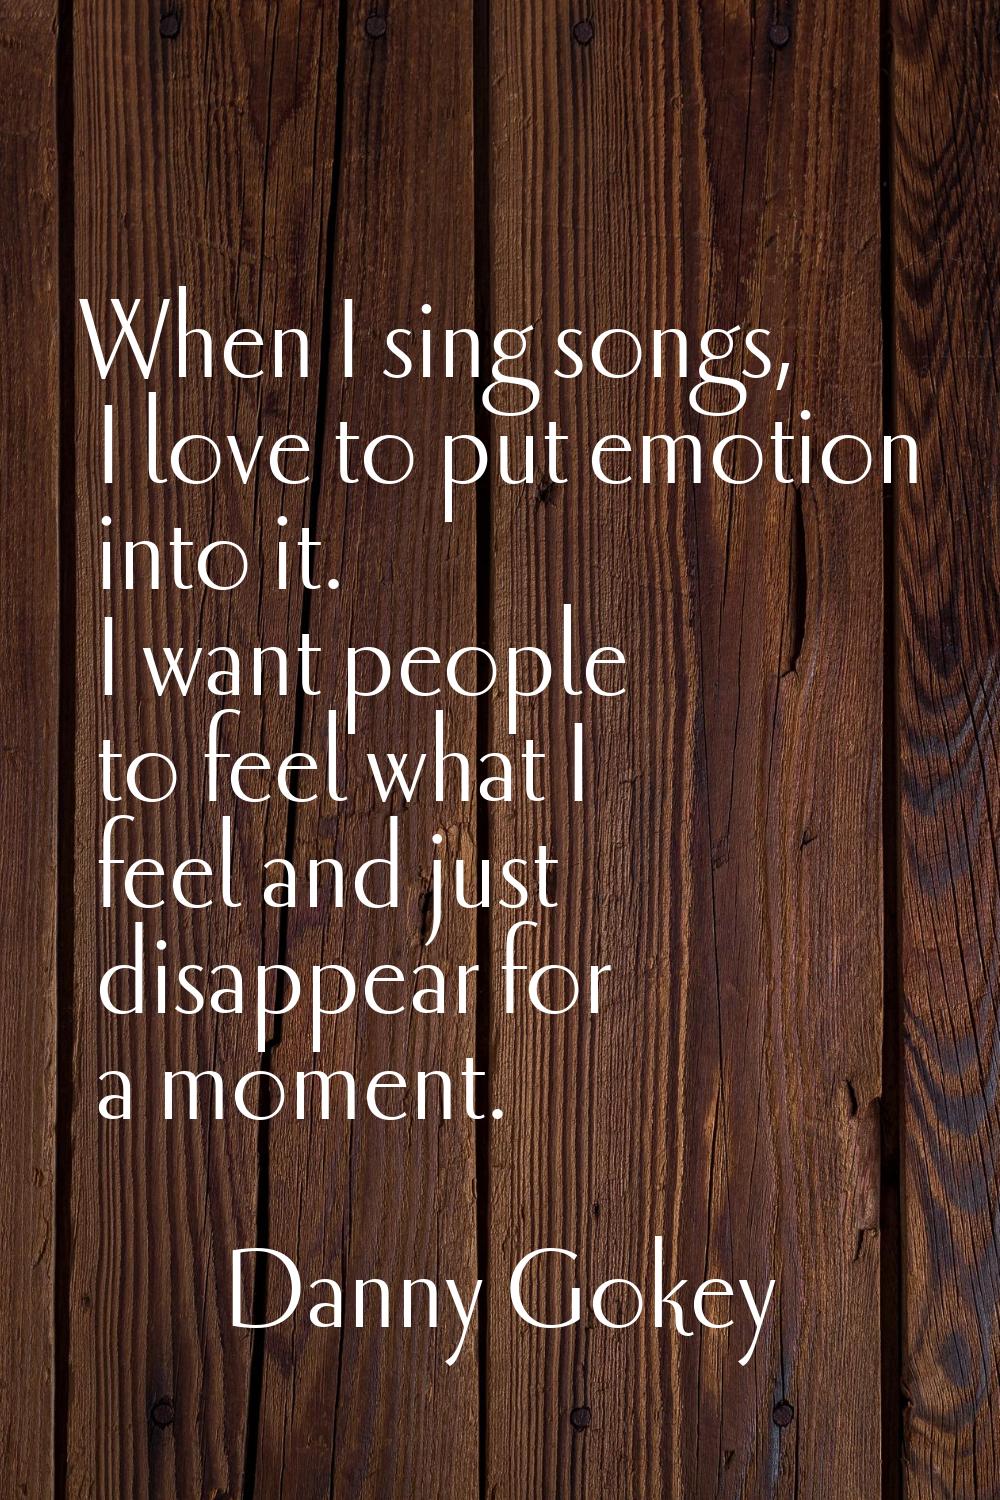 When I sing songs, I love to put emotion into it. I want people to feel what I feel and just disapp